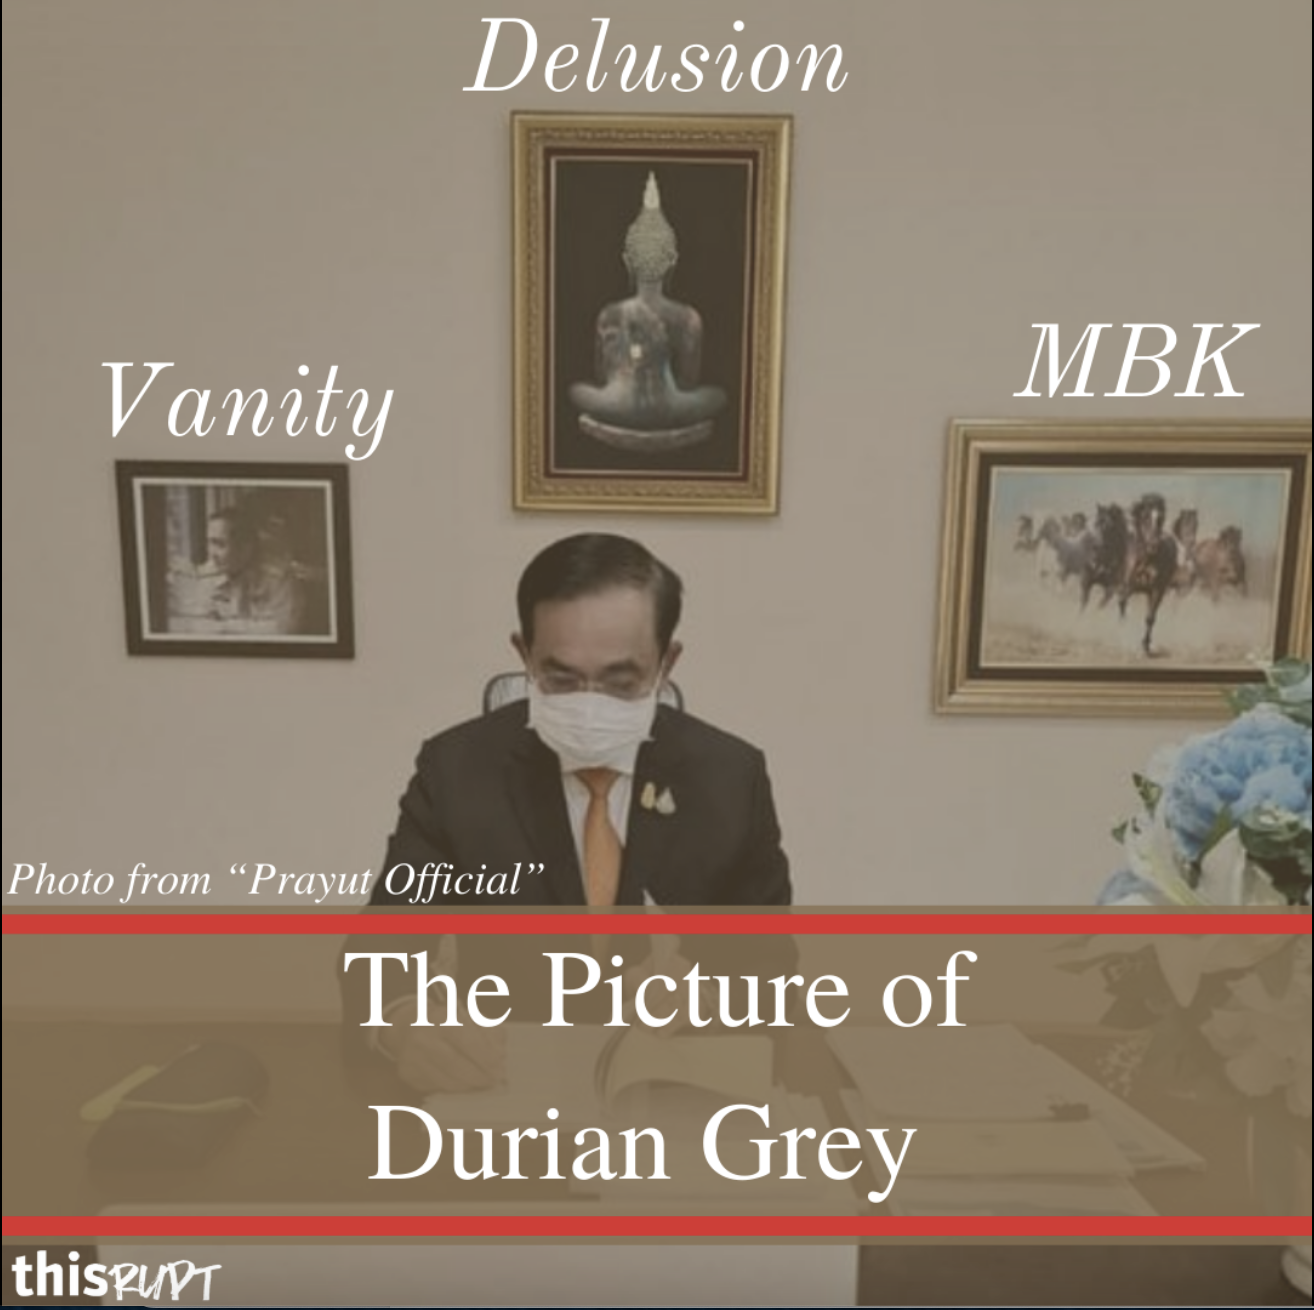 A 14-day lockdown and Oscar Wilde’s The Picture of Durian Grey